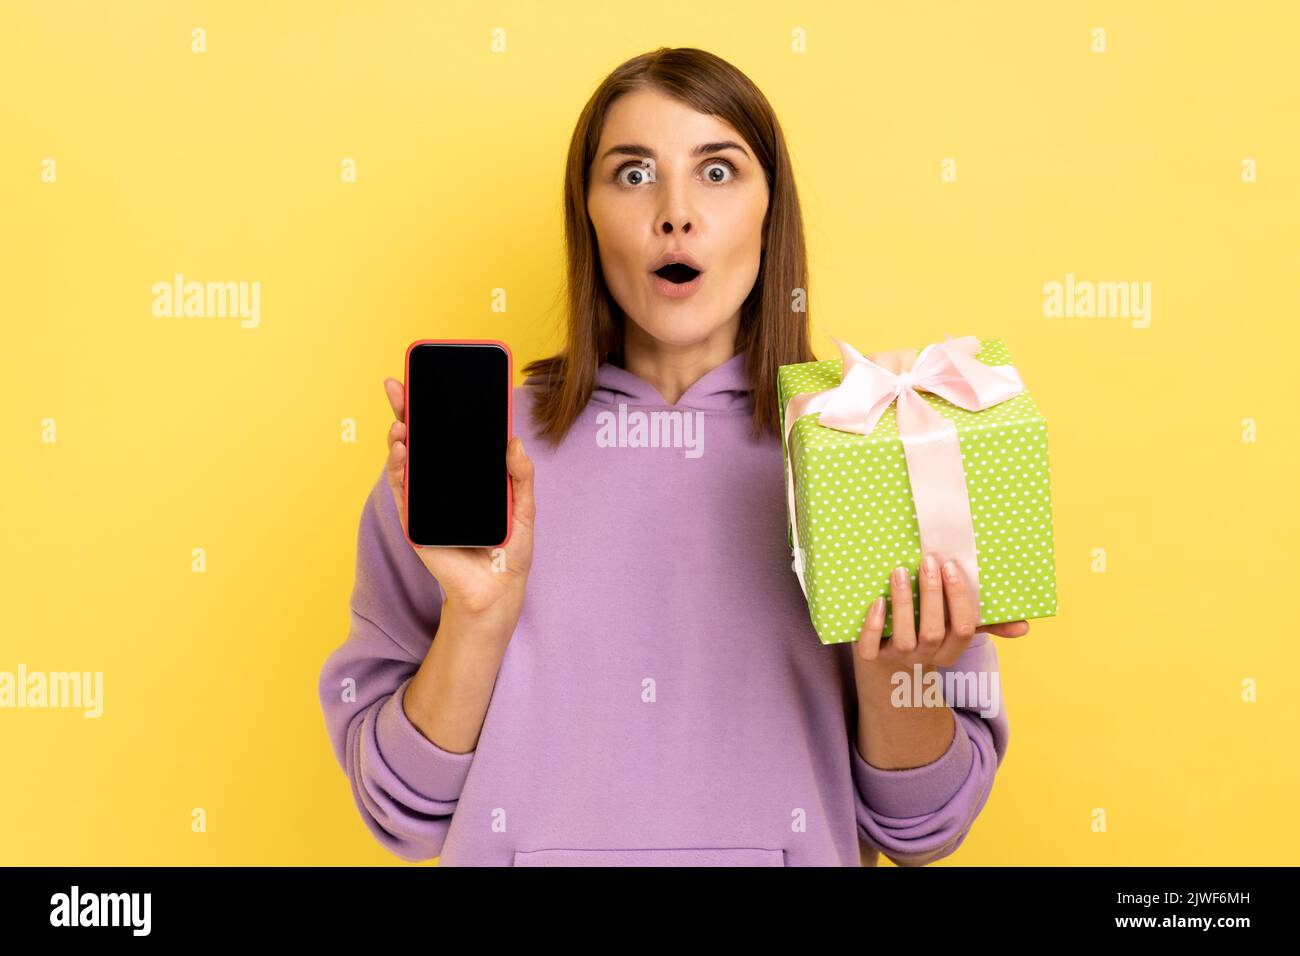 Present, bonus for mobile user. Portrait of amazed surprised woman holding gift box and cell phone with mock up, blank display, wearing hoodie. Indoor studio shot isolated on yellow background. Stock Photo